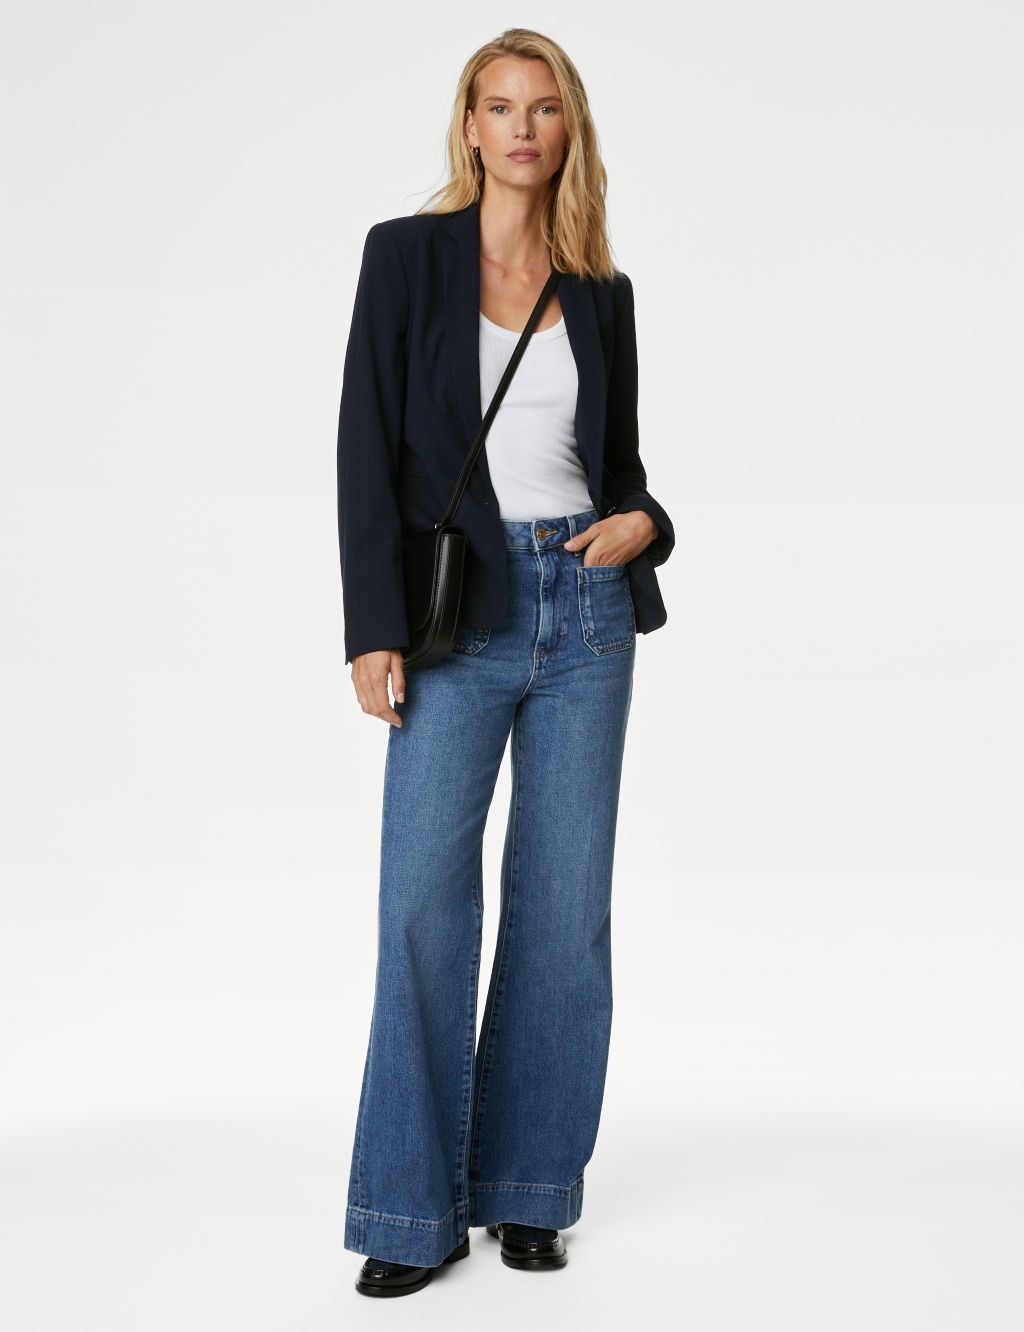 Patch Pocket Flare High Waisted Jeans image 1